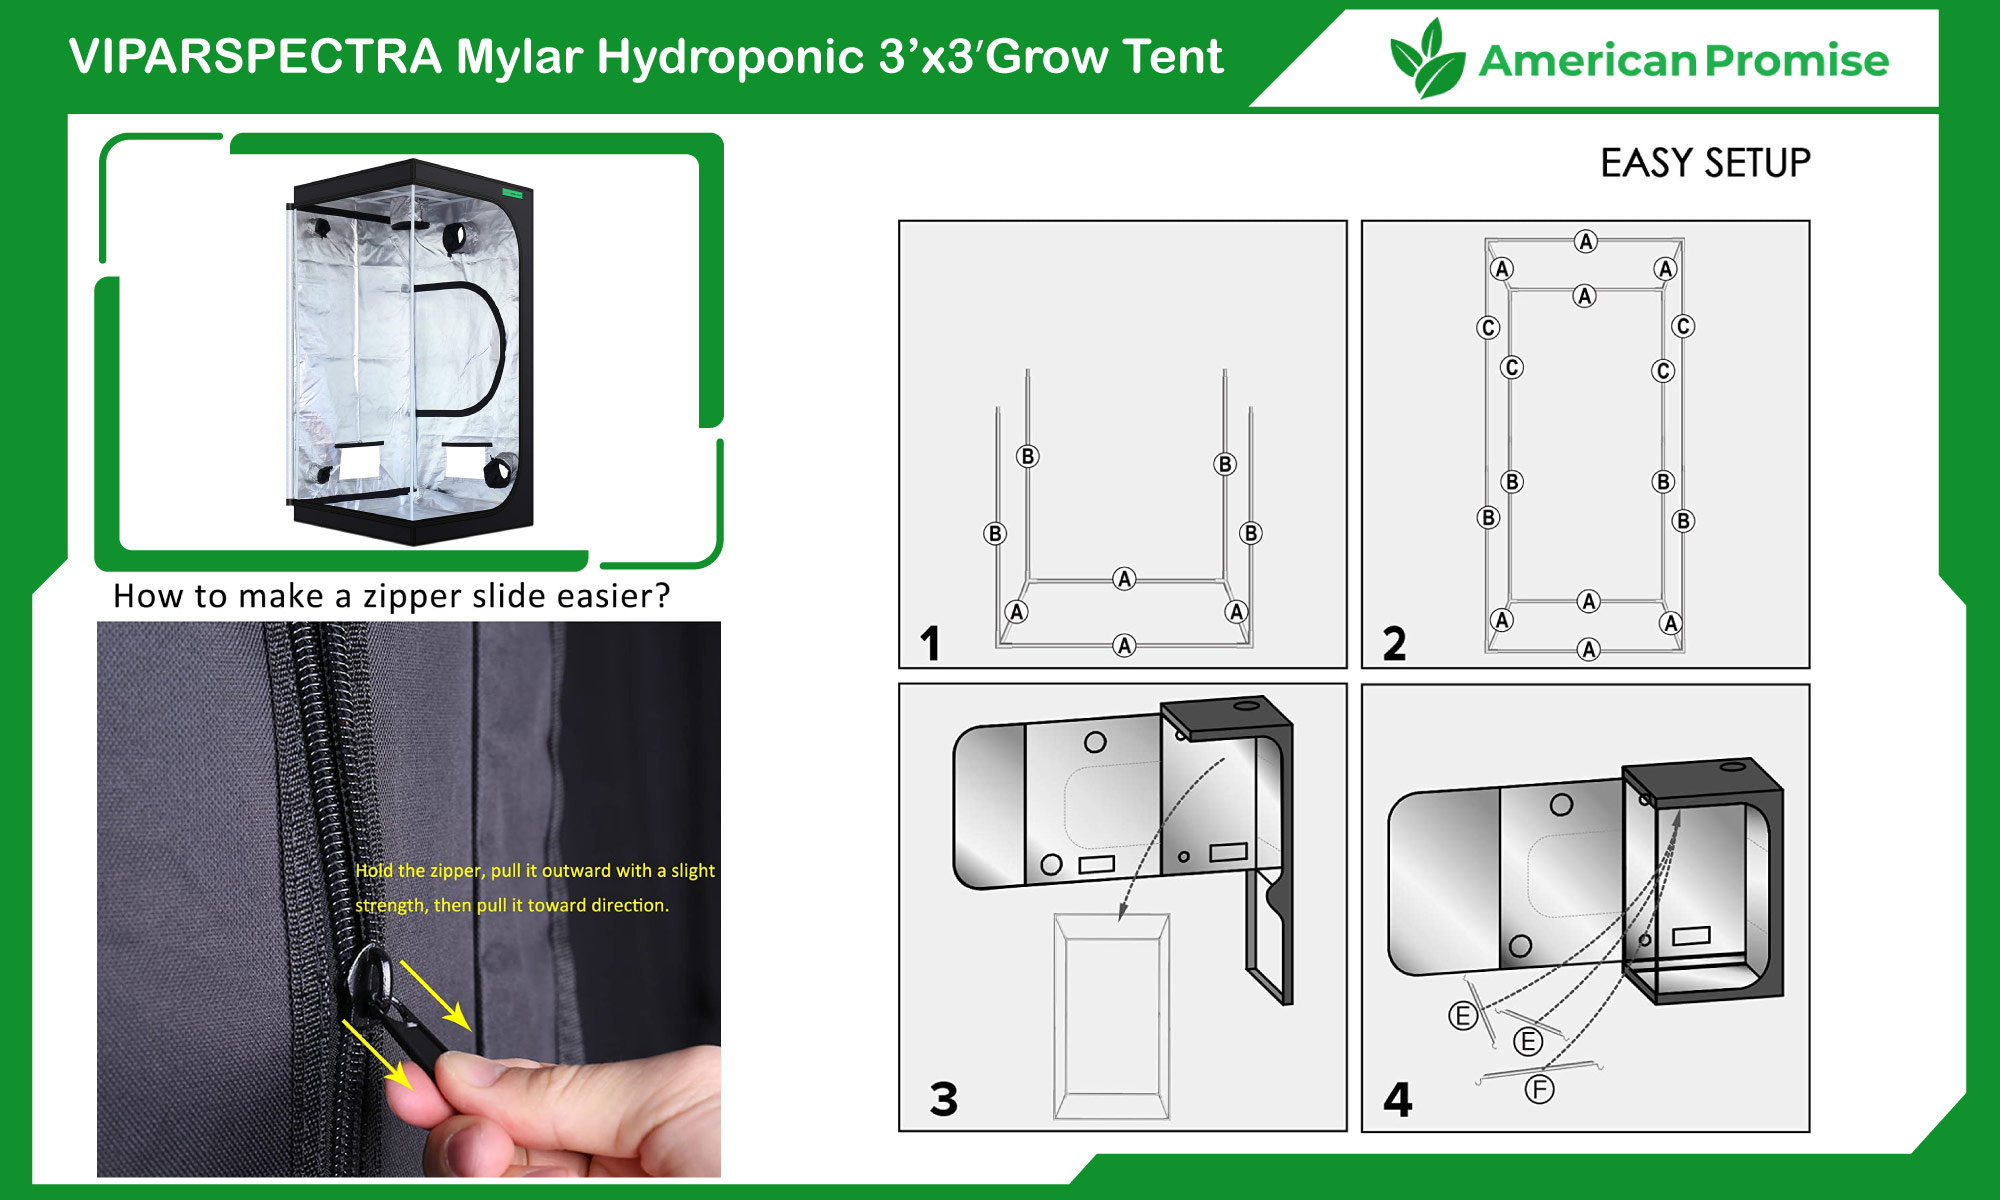 VIPARSPECTRA Mylar Hydroponic 3'x3' Tent